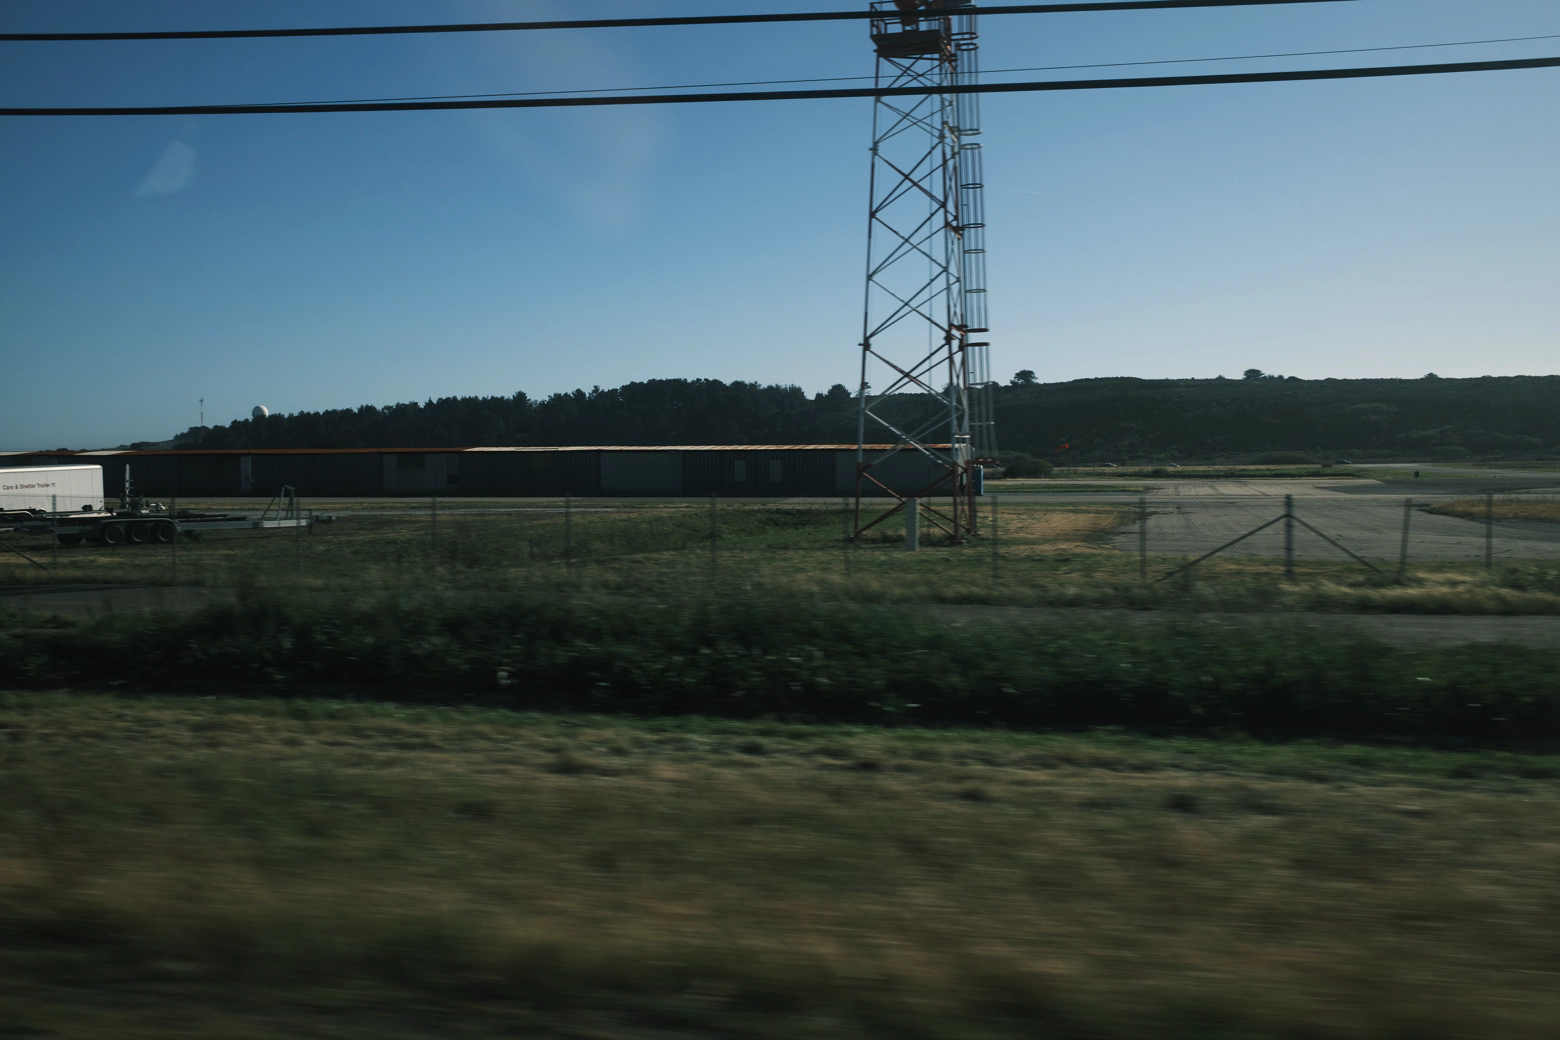 A blurry photo taken from a car of a field with power lines and a large, squat building in the background